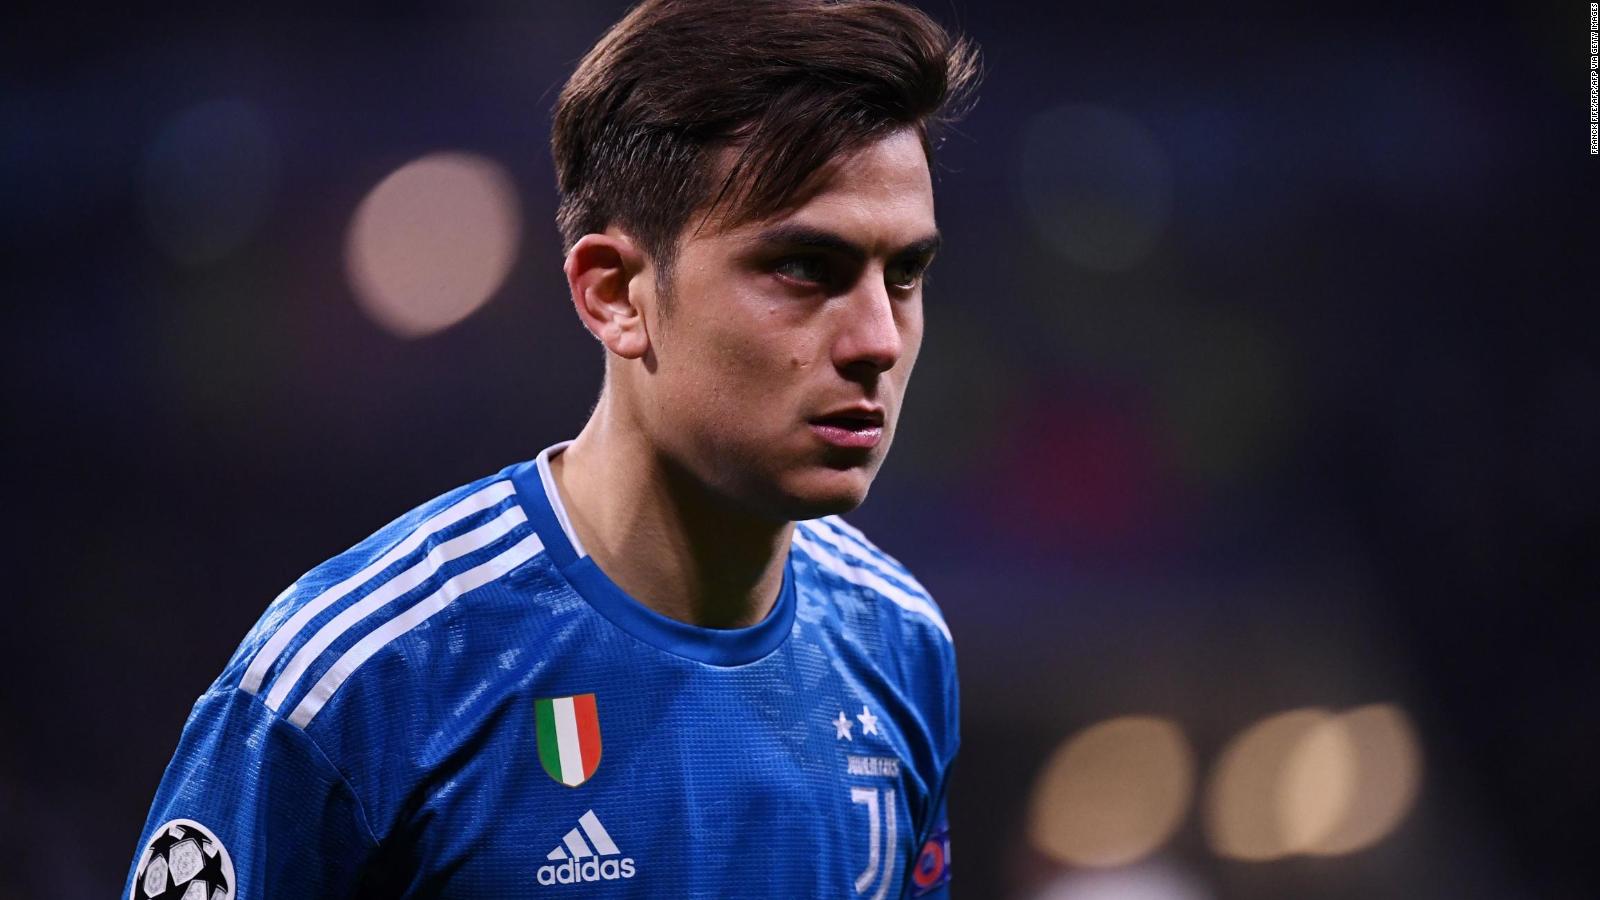 Juventus star Paulo Dybala: 'it is not only people of color that should be fighting racism. We all have to'